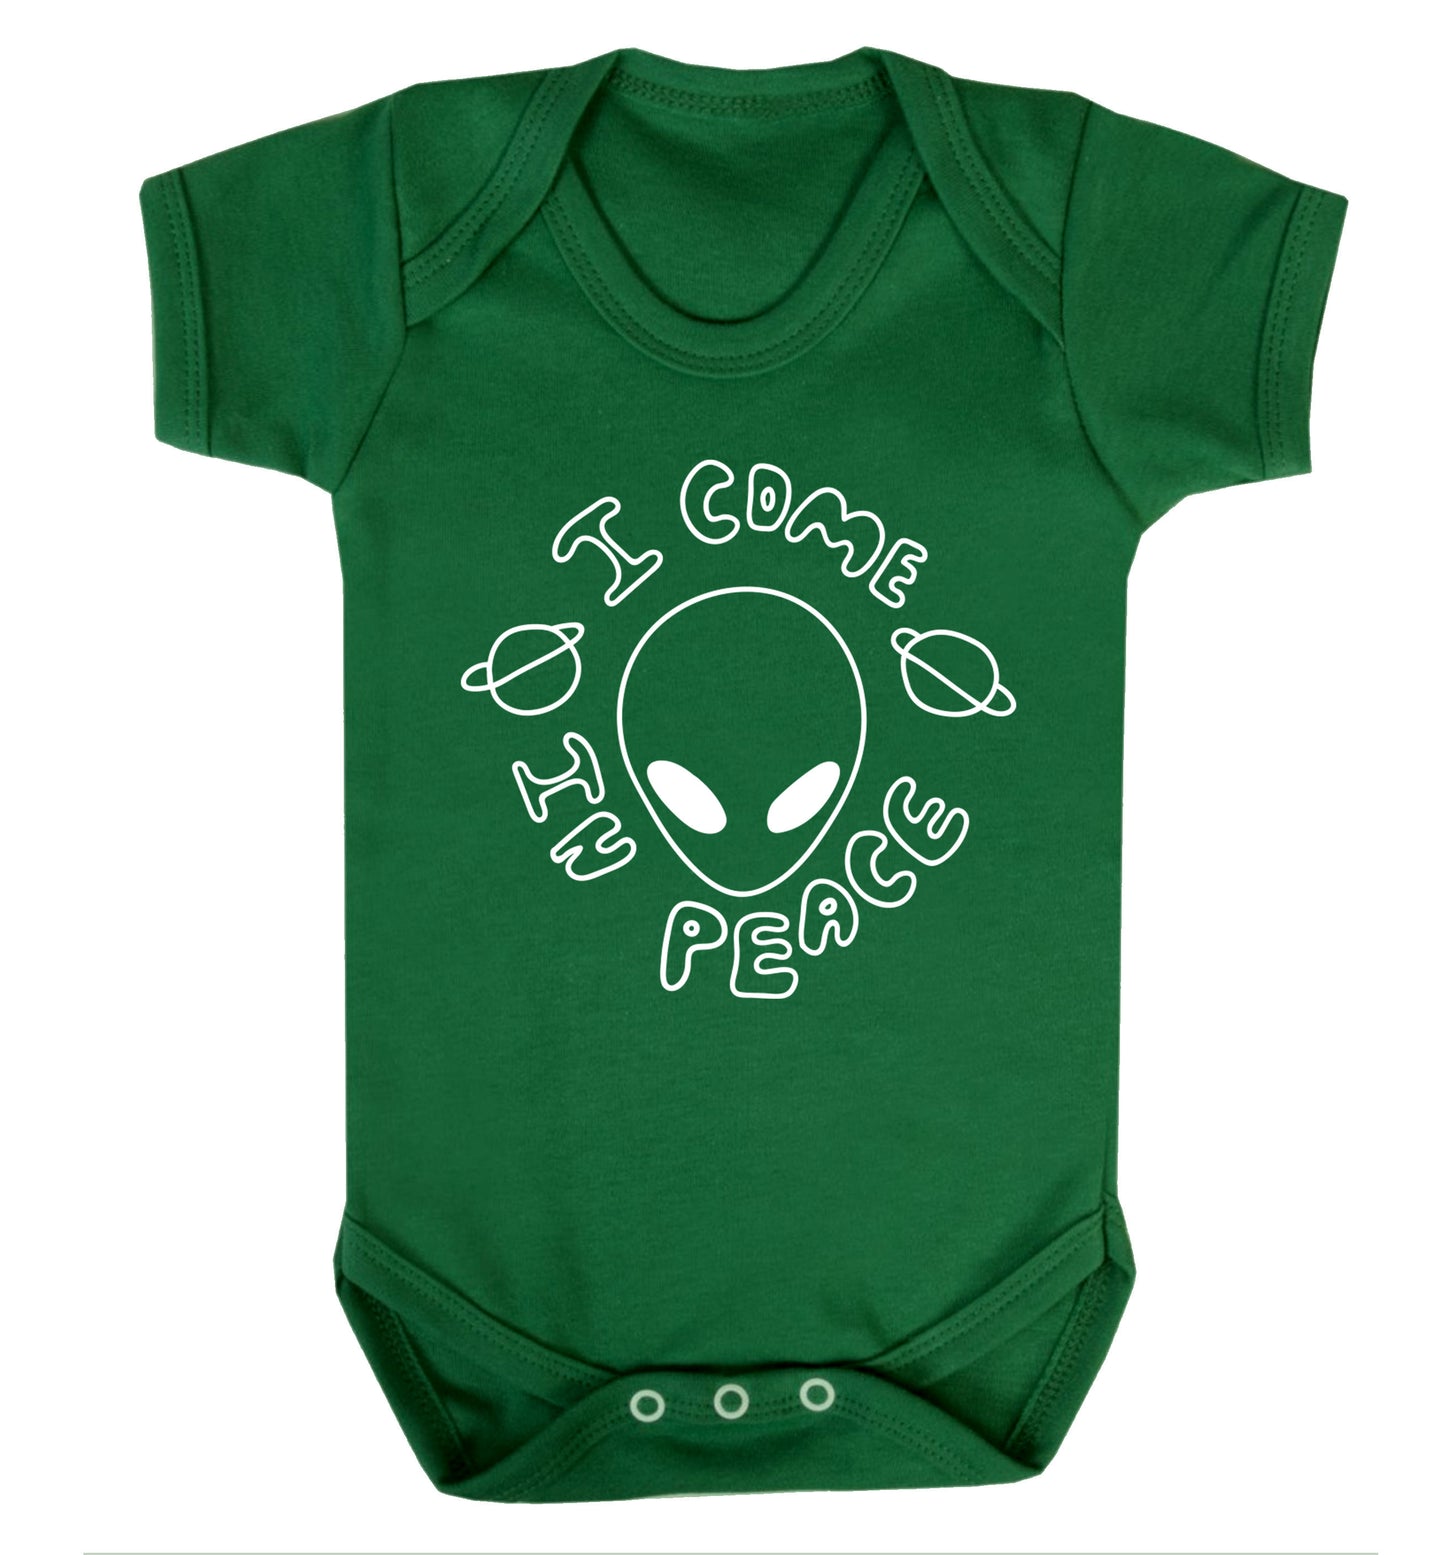 I come in peace Baby Vest green 18-24 months